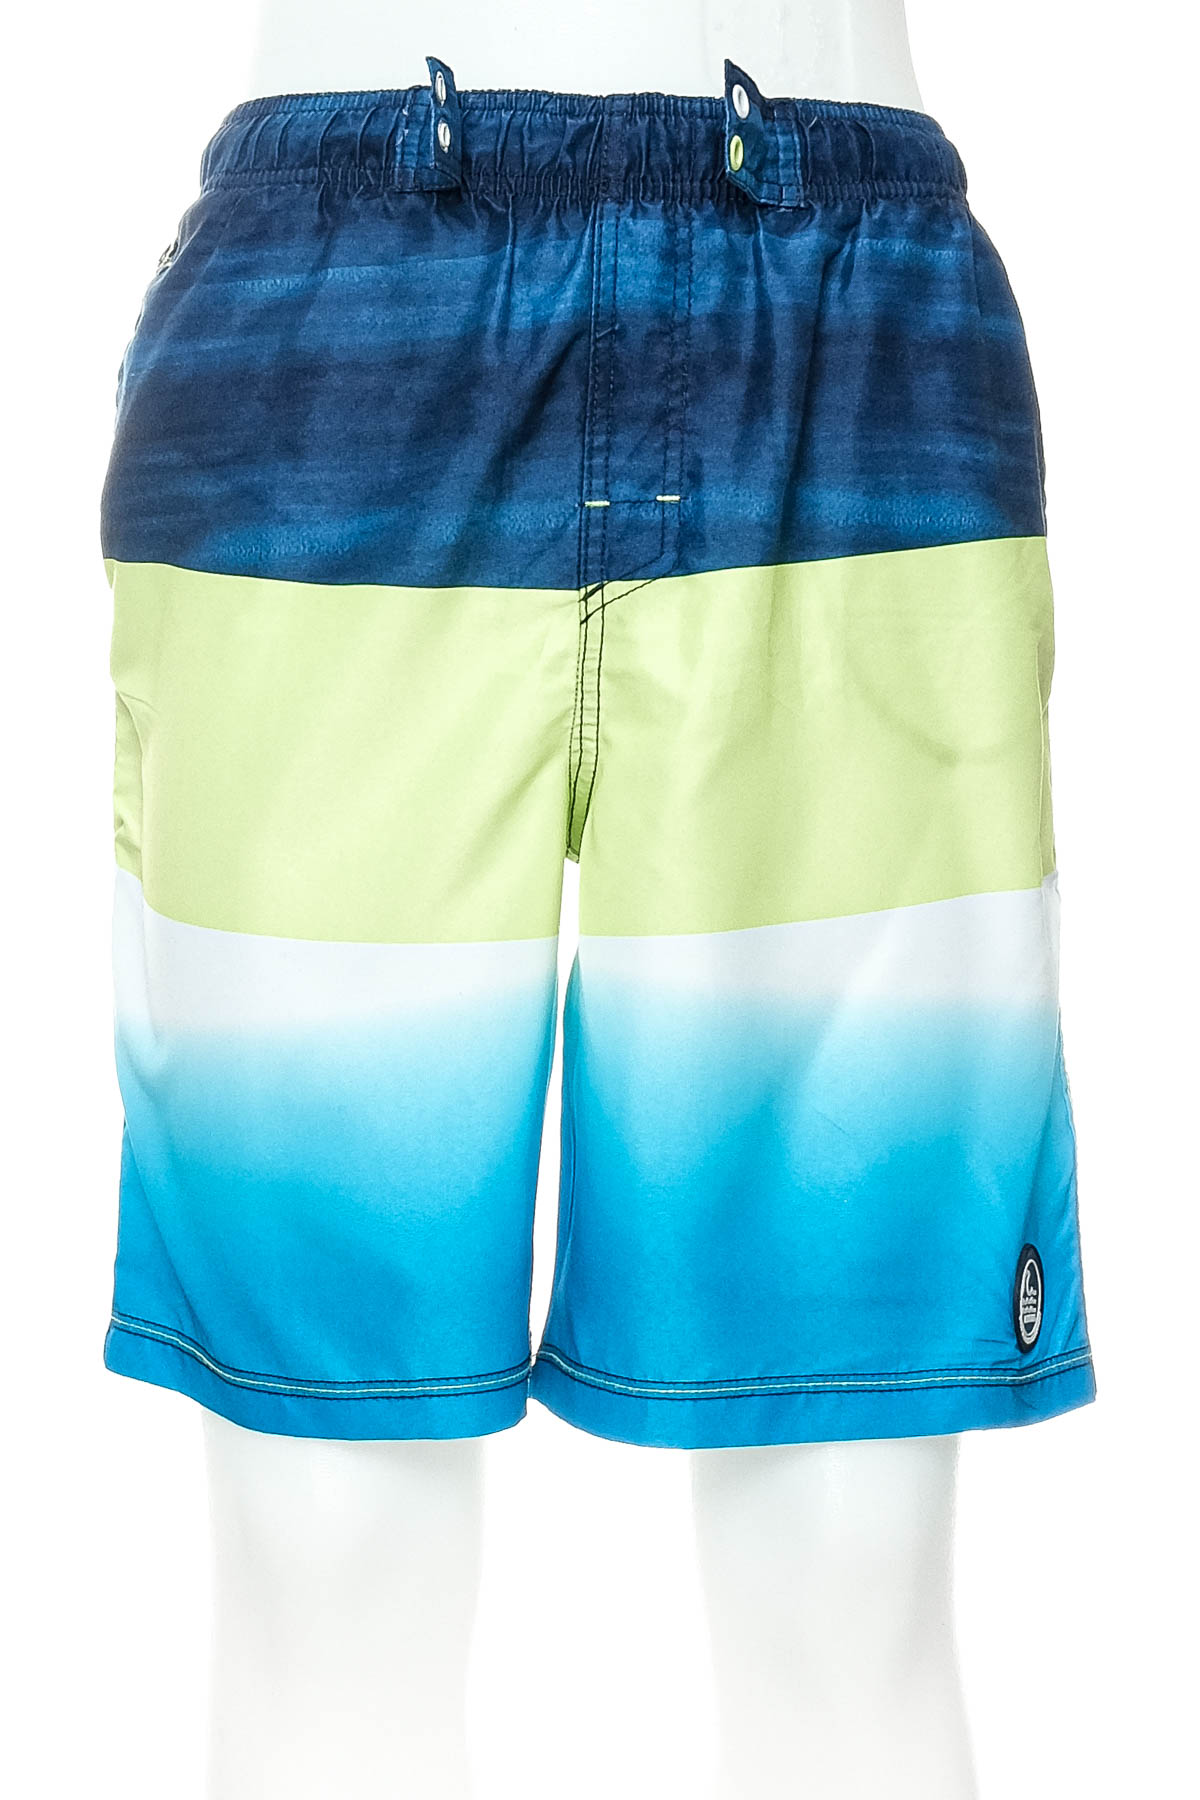 Shorts for boys - C&A - 0